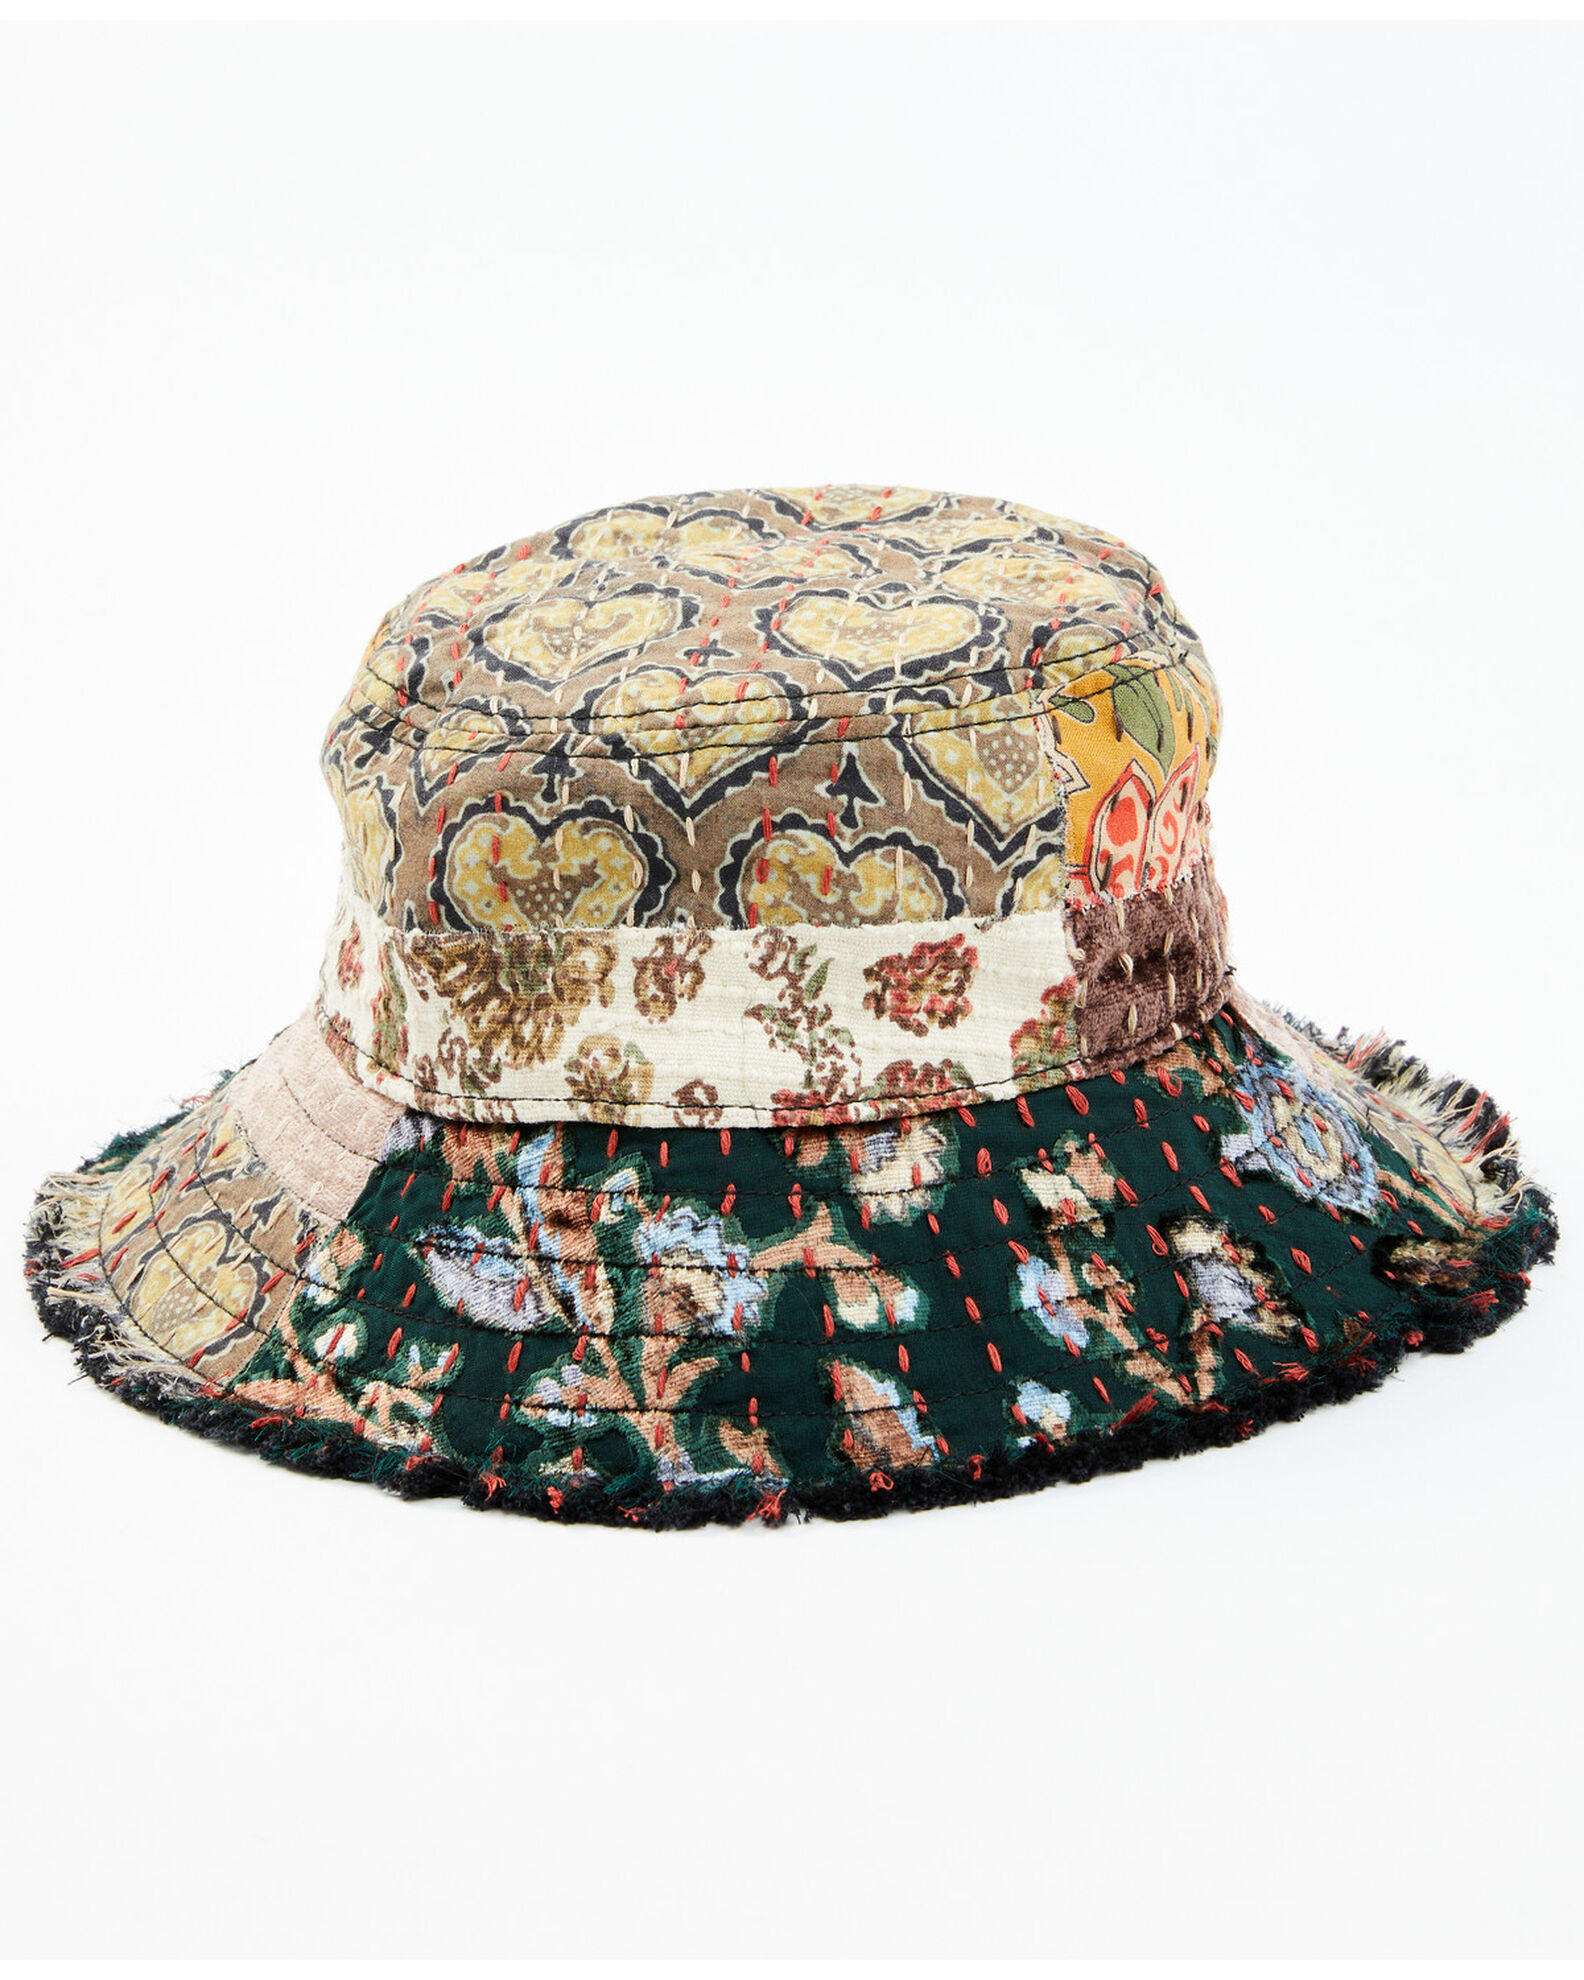 Product Name: Cleo + Wolf Women's Patchwork Bucket Hat